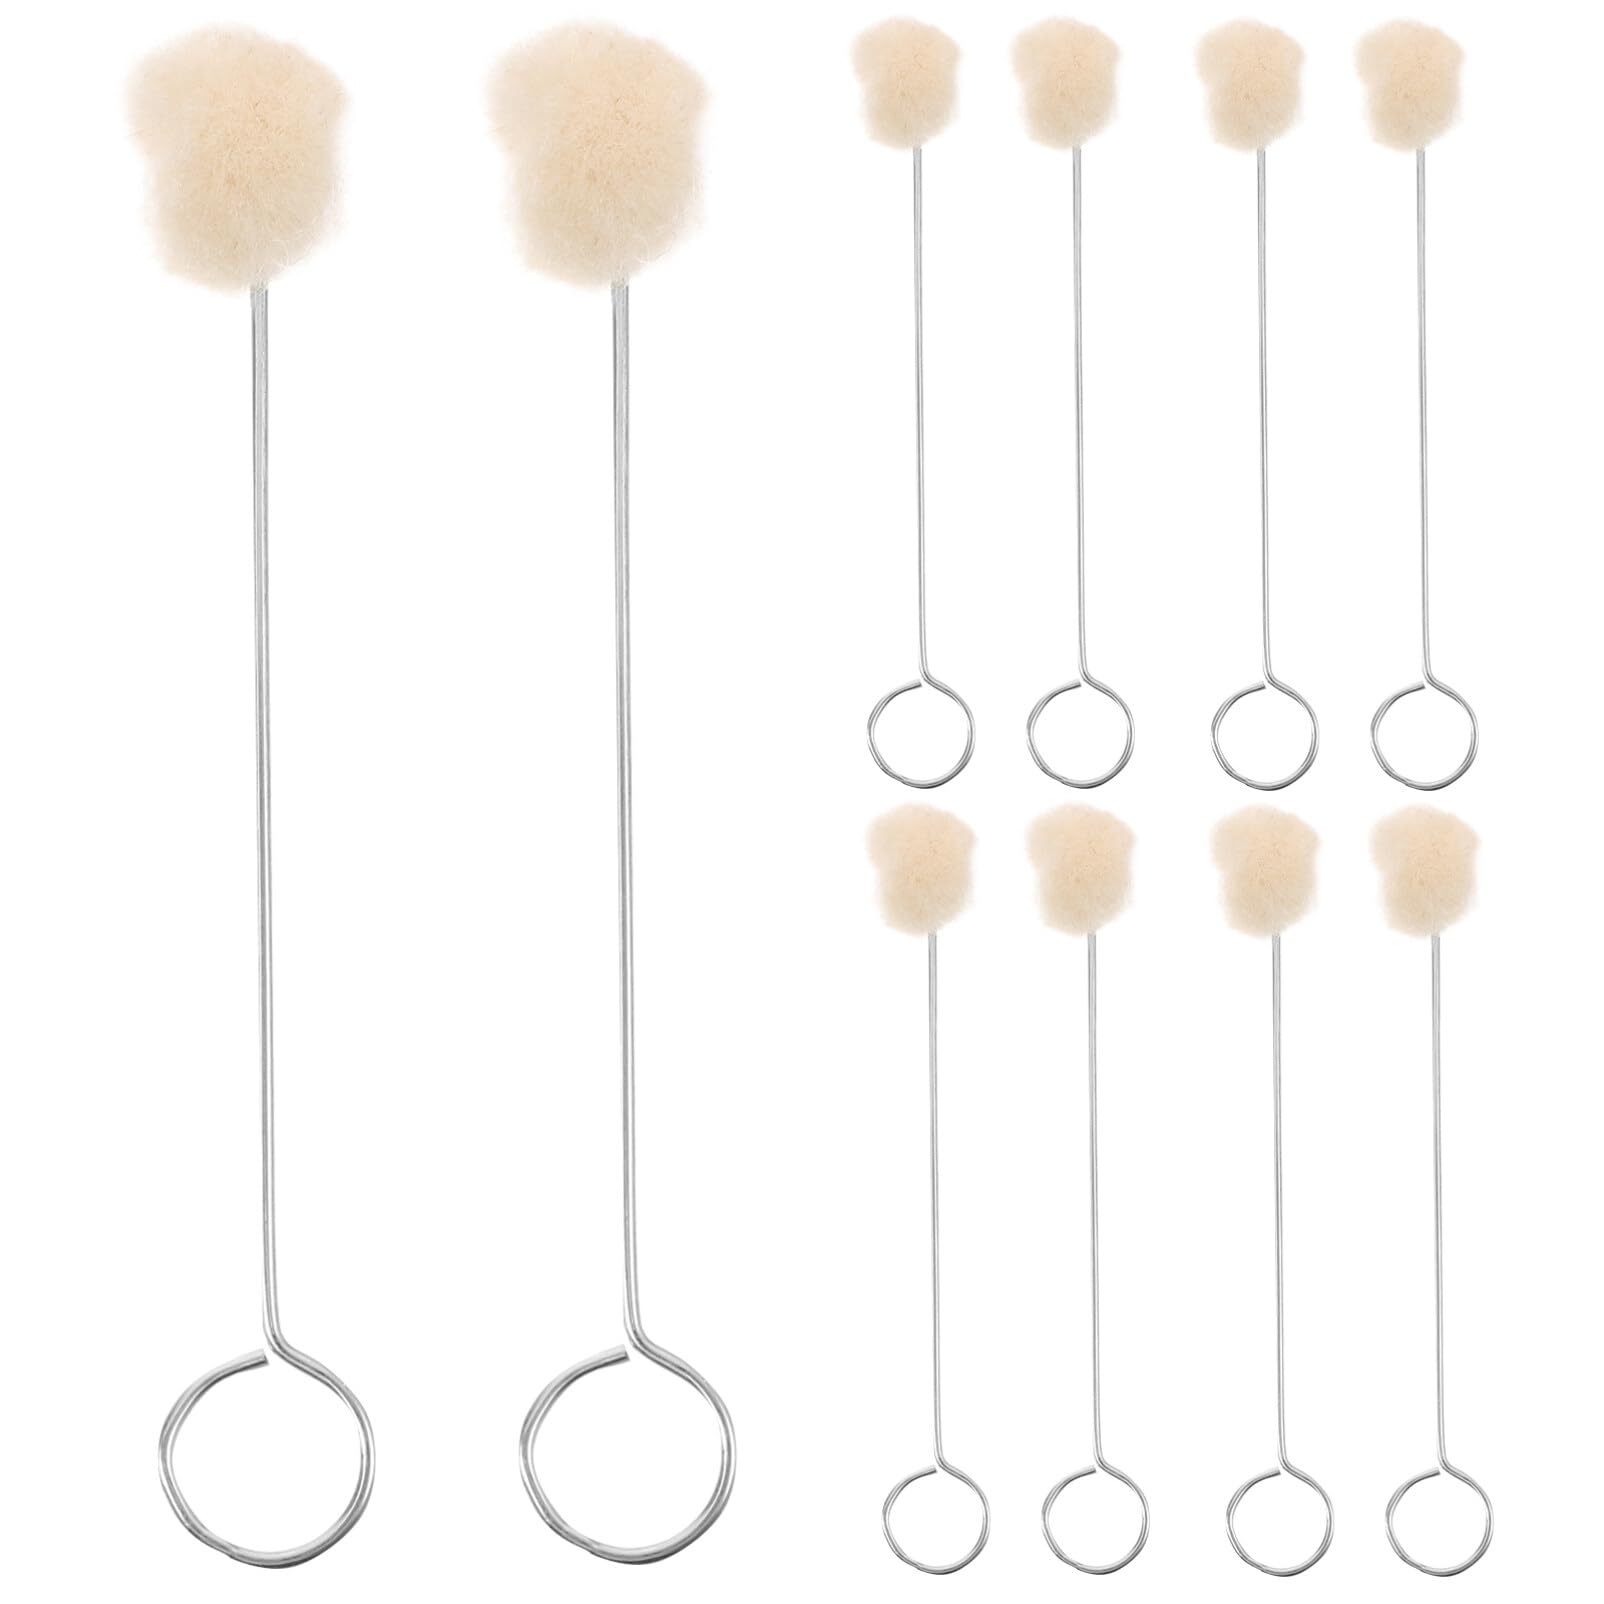 MAGICLULU 10pcs Wool Daubers Ball Brush Leather Dye Leather Tool Leather Crafting Tools for Leather Dyes for DIY Crafts Projects